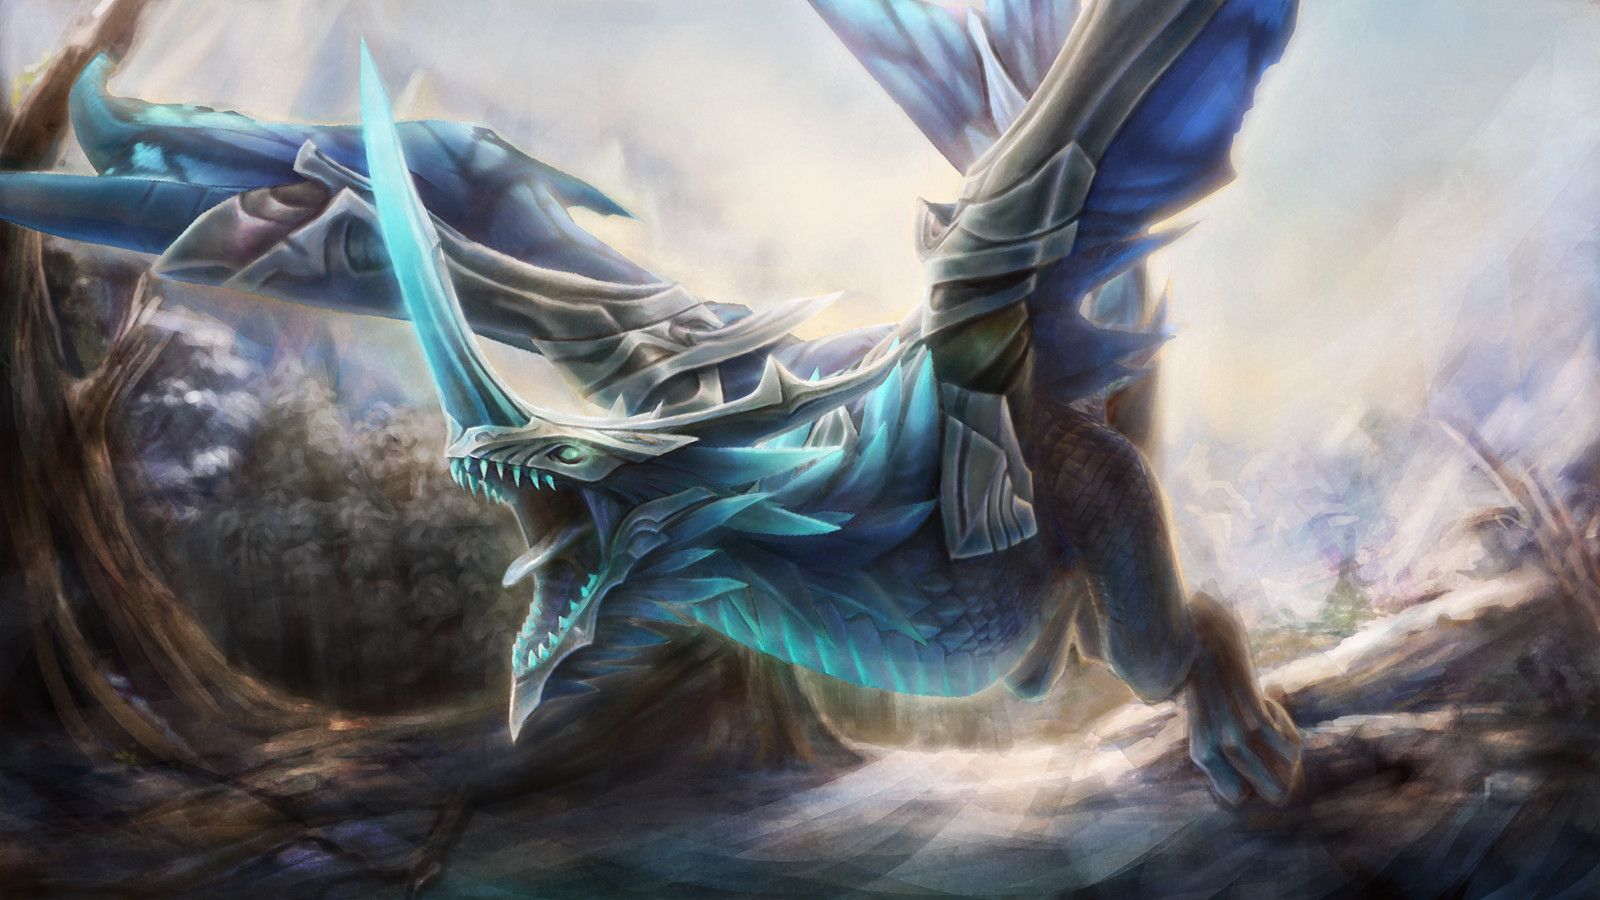 Dota 2's Aghanim's Labyrinth patch: Winter Wyvern, Omniknight, and Disruptor hit the hardest